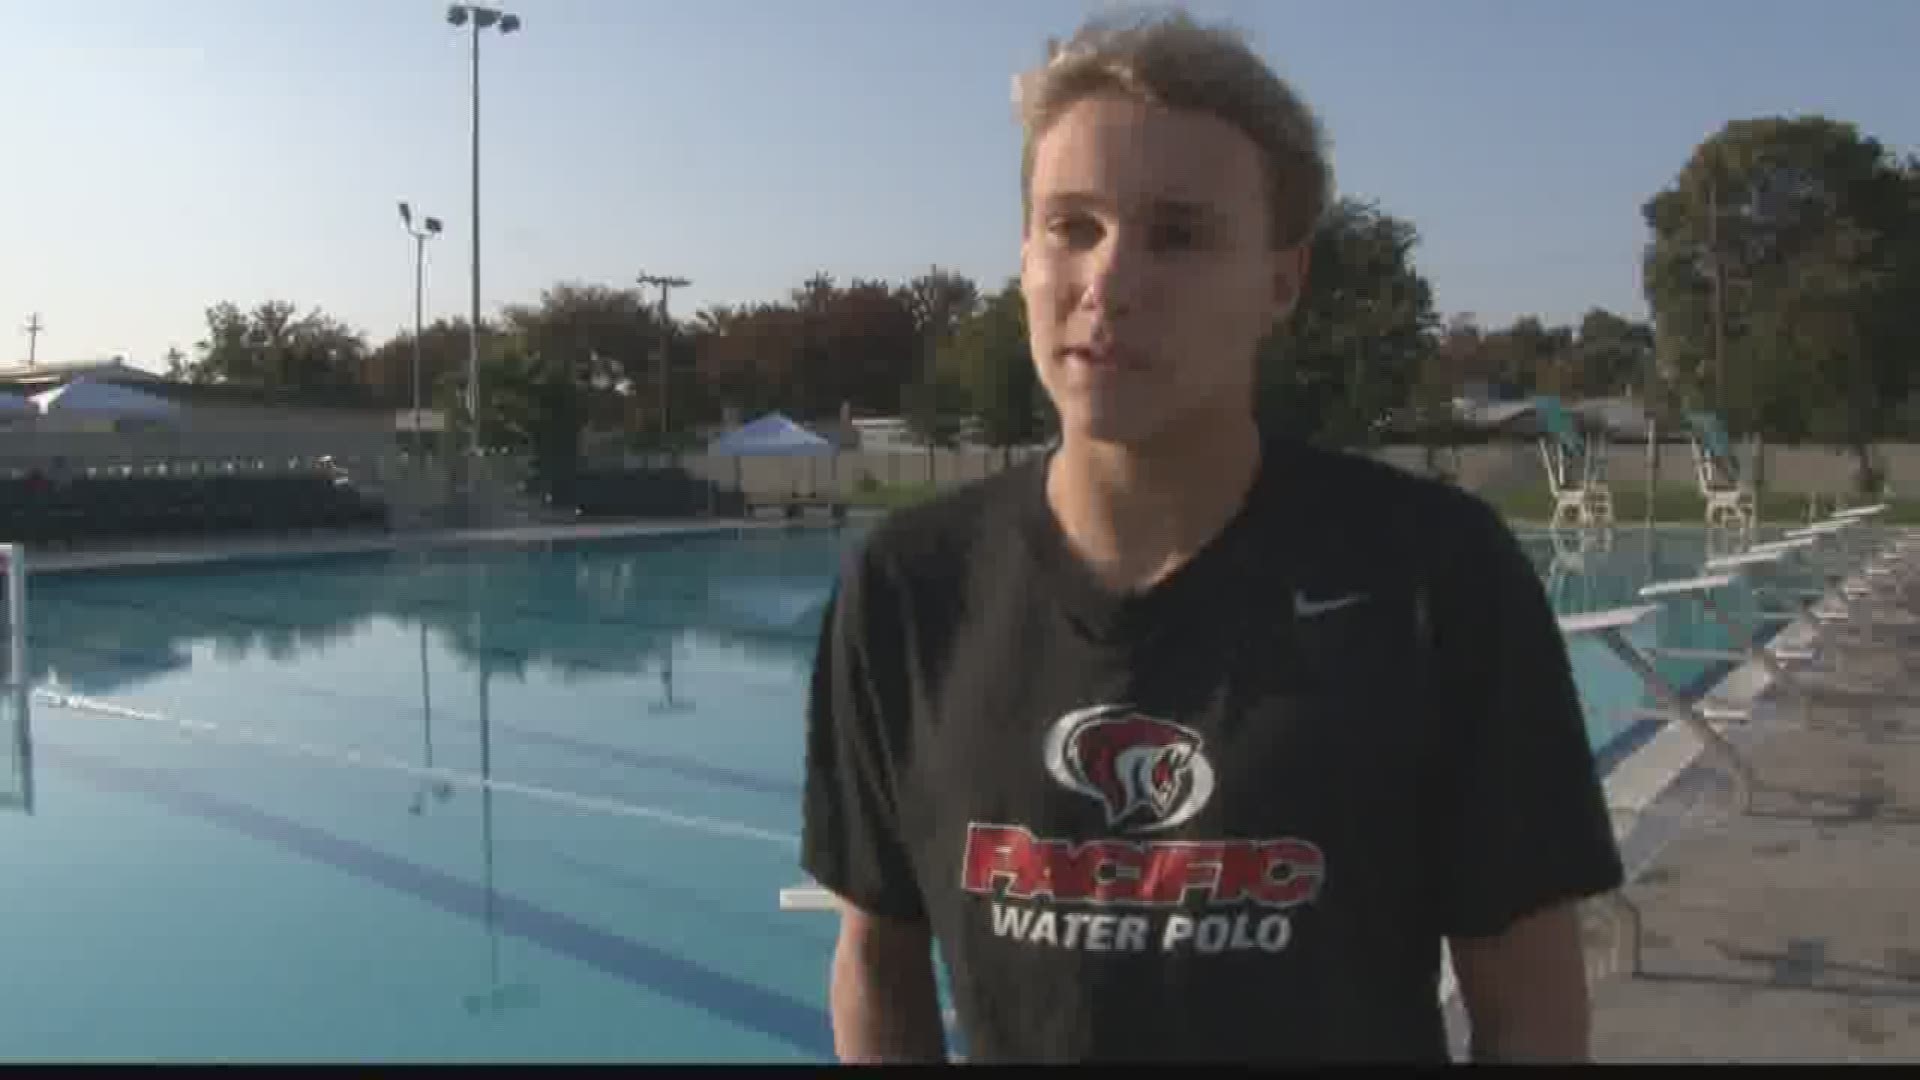 Matthew Hosmer is one of the best water polo players in the state and his talents have taken him all around the world.